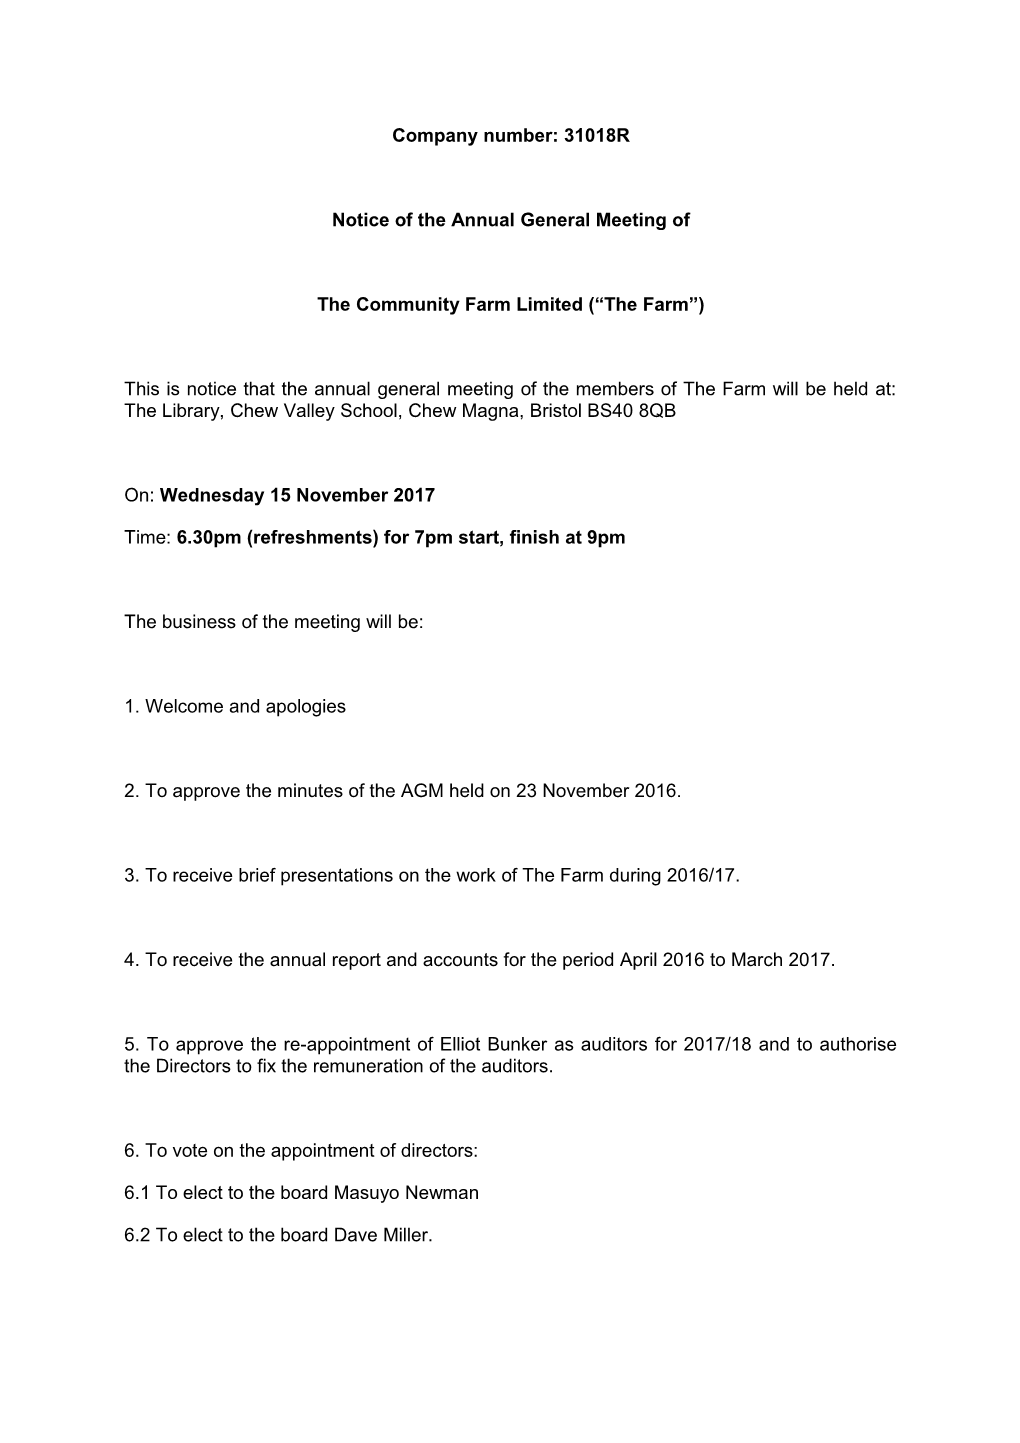 Notice of the Annual General Meeting Of